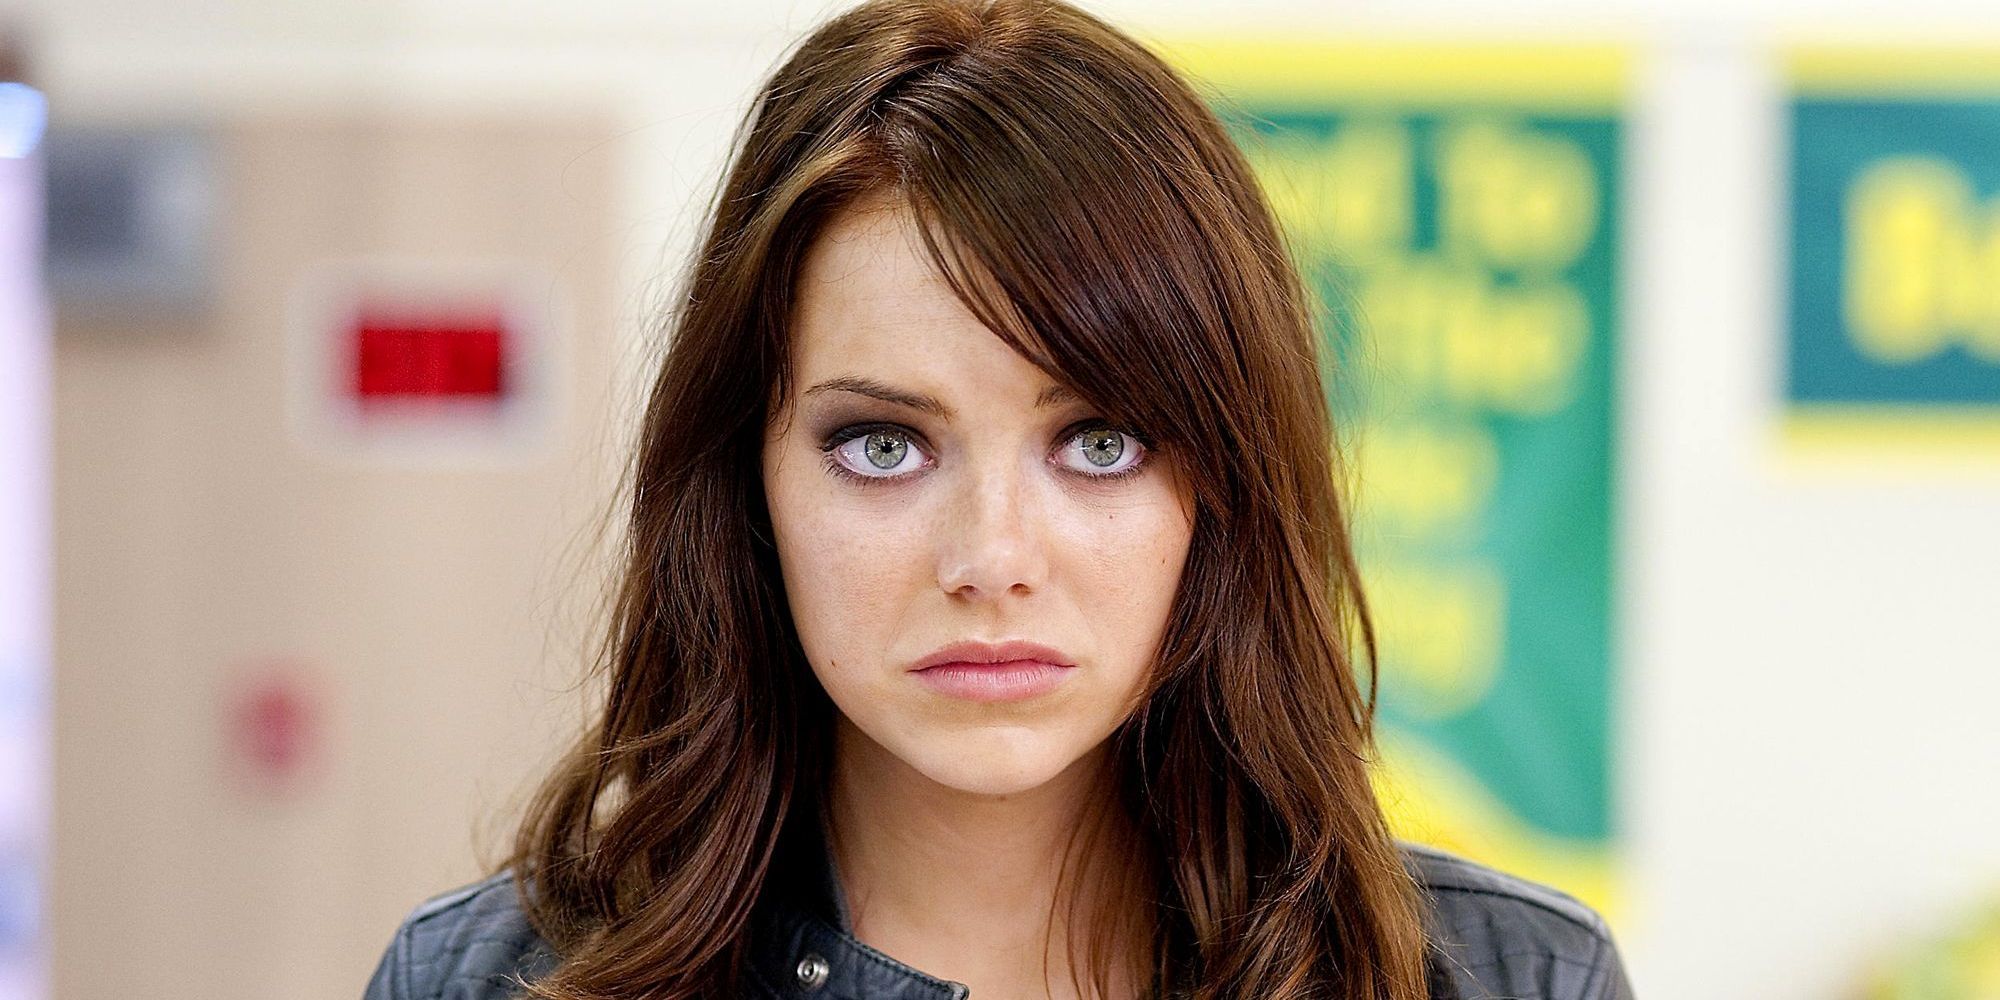 Emma Stone looks scared of zombies in Zombieland.